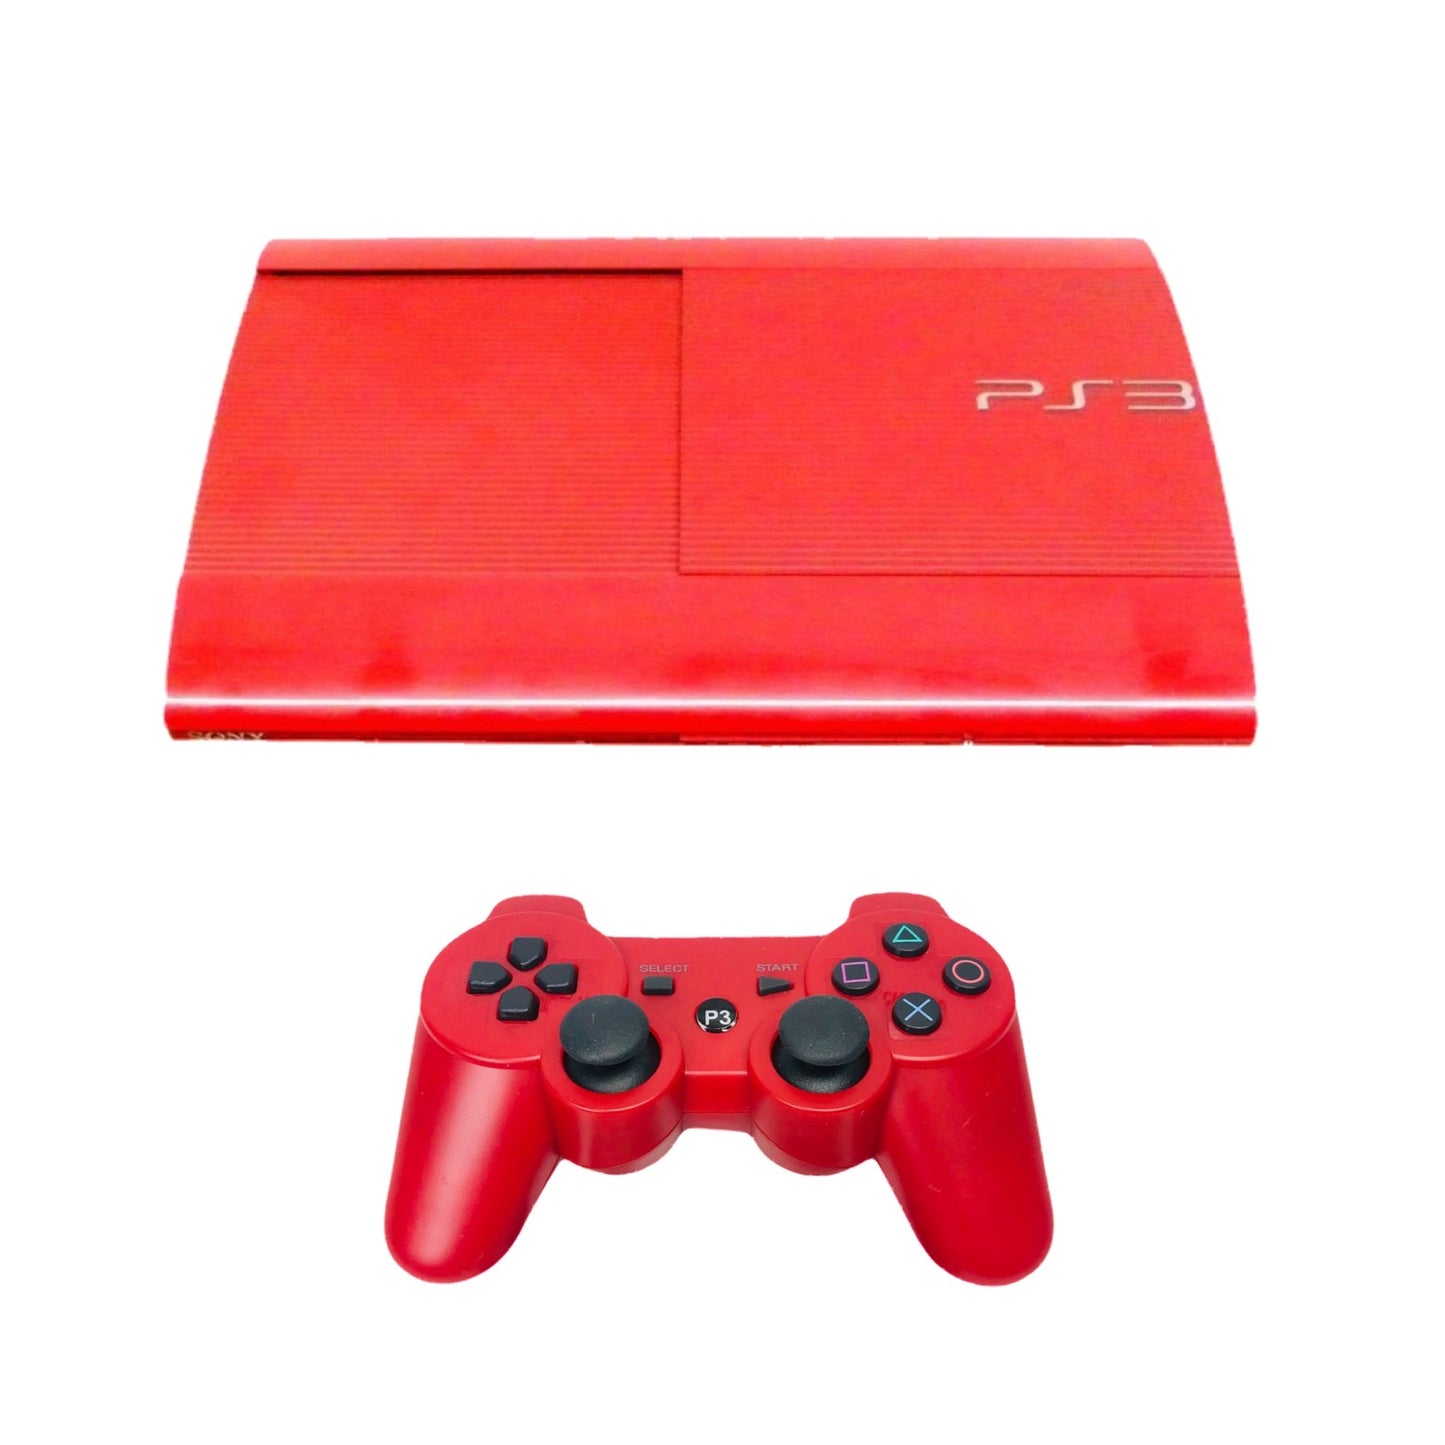 SONY PlayStation 3 Super Slim Console 500GB Limited Edition Red from 2P Gaming